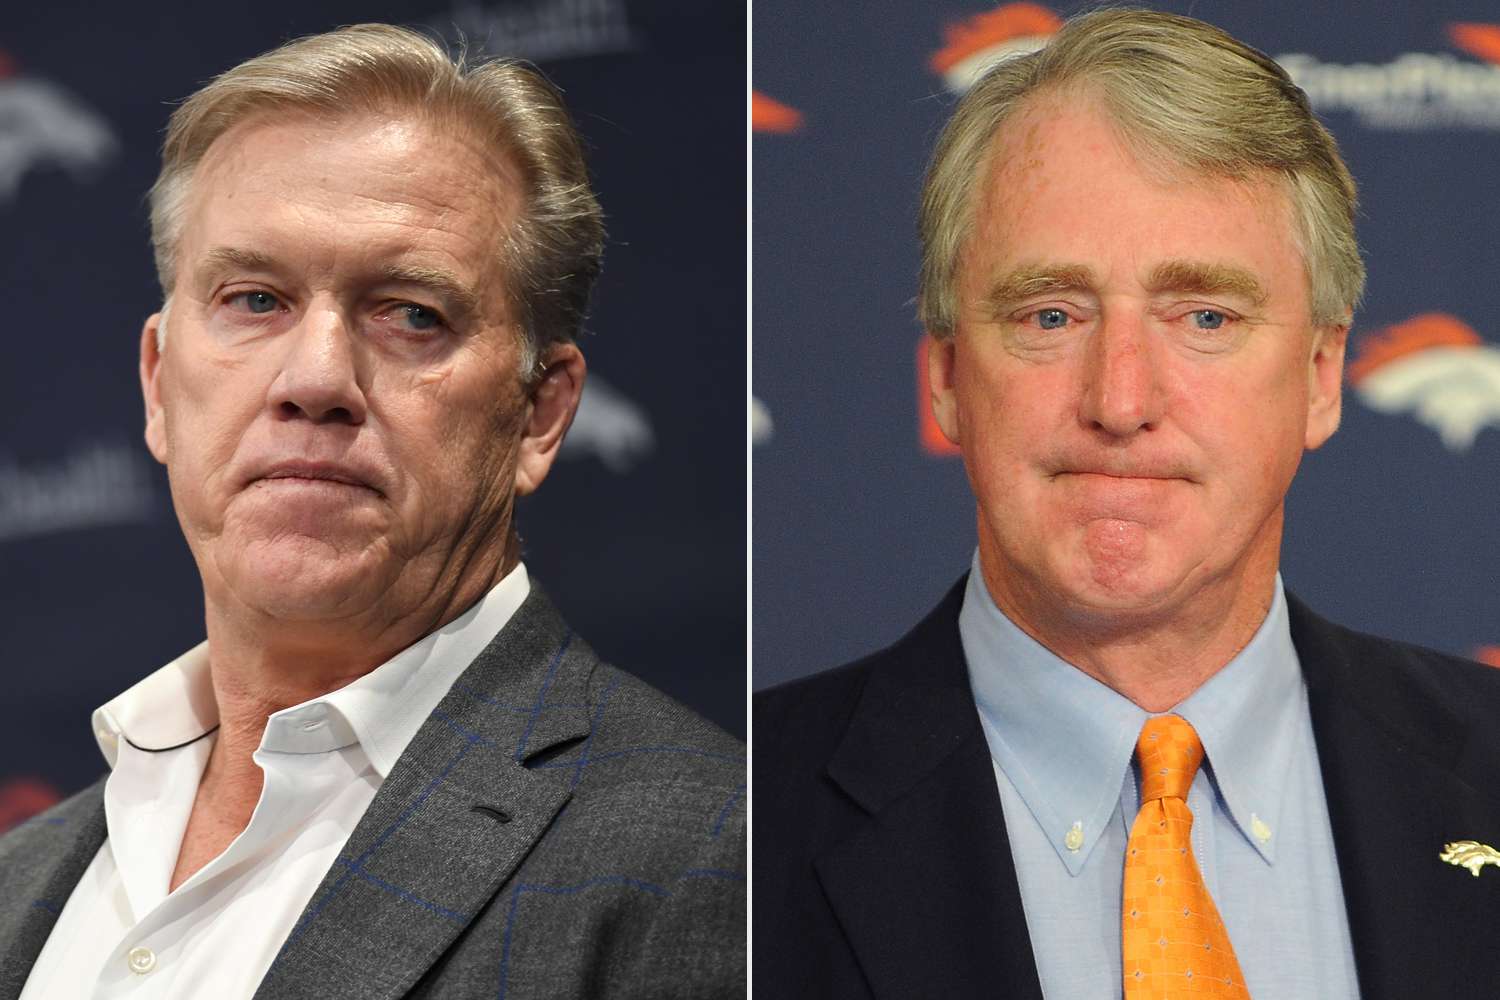 <p>The Denver Broncos General Manager John Elway and President and CEO Joe Ellis have tested positive for coronavirus, the Broncos announced on Nov. 3 on Twitter. </p>
                            <p>"Broncos President &amp; CEO Joe Ellis as well as Football Operations/General Manager John Elway were informed this morning they tested positive for COVID-19," the statement began.</p>
                            <p>"After not feeling 100 percent on Sunday morning, Joe promptly reported his symptoms to our medical team and watched Sunday's game at home as a precaution," the team said of Ellis, 61. "He continued to work from home on Monday before receiving a positive test result this morning."</p>
                            <p>Meanwhile, Elway, 60, "immediately left UCHealth Training Center on Monday morning after experiencing minor symptoms that he quickly brought to the attention of our medical staff," the Broncos said.</p>
                            <p>"Other than mild symptoms, both Joe and John are doing well," the team added. "They will continue to work from home in self-isolation and participate in virtual meetings while their health is monitored."</p>
                            